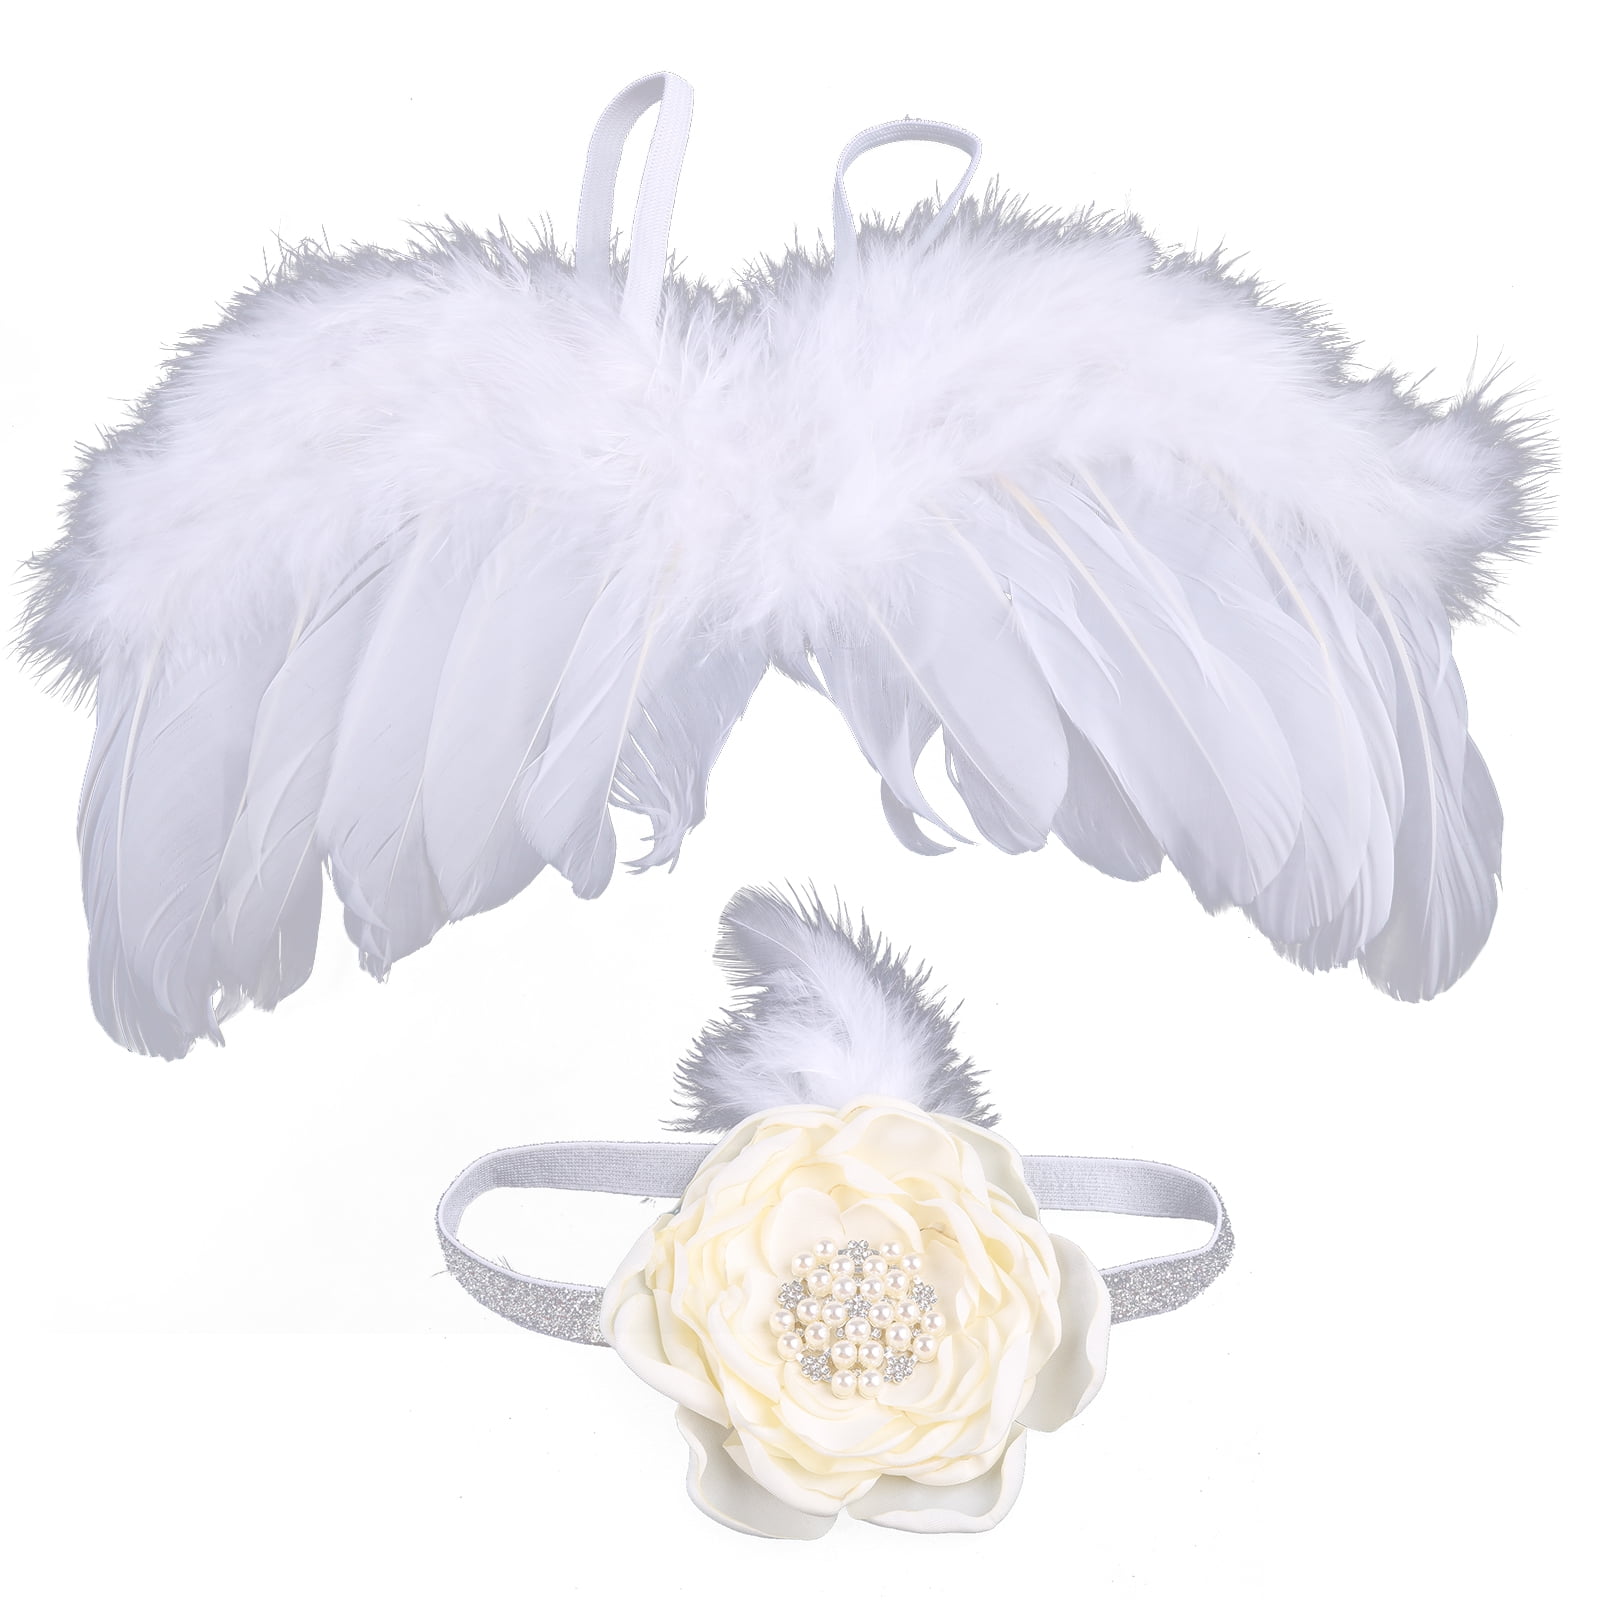 Swovo Baby Angel Wings Feather Wings Newborn Photo Prop with Leave Headbands Set Newborn Costume 0-6 Months Infant Toddler 